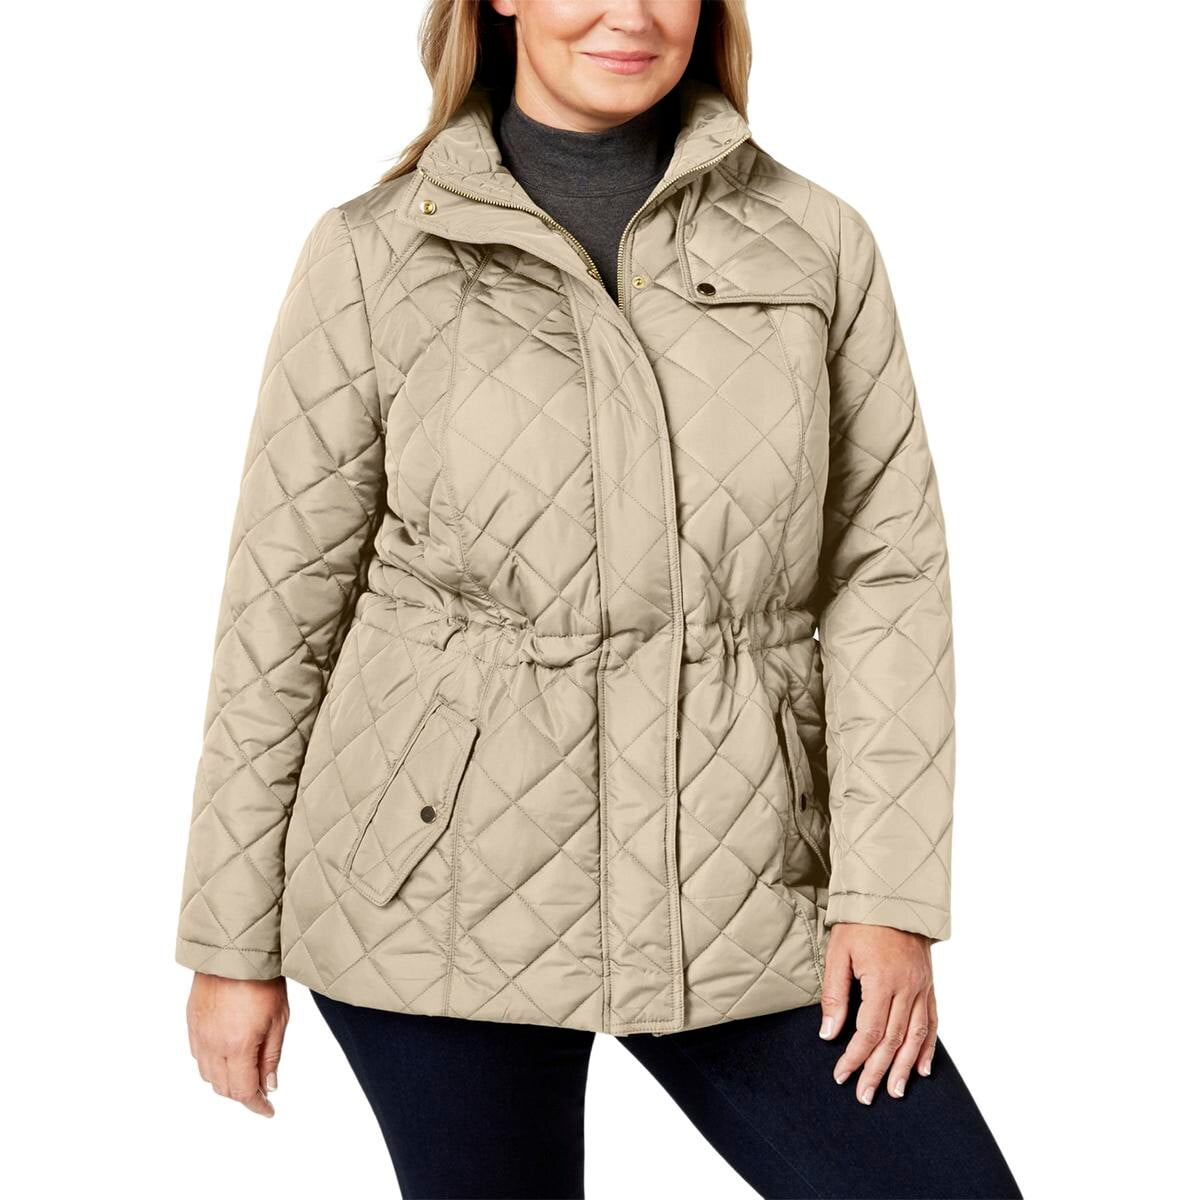 Charter Club - Charter Club | Quilted Zip-Front Jacket | Tan | Size 0X ...